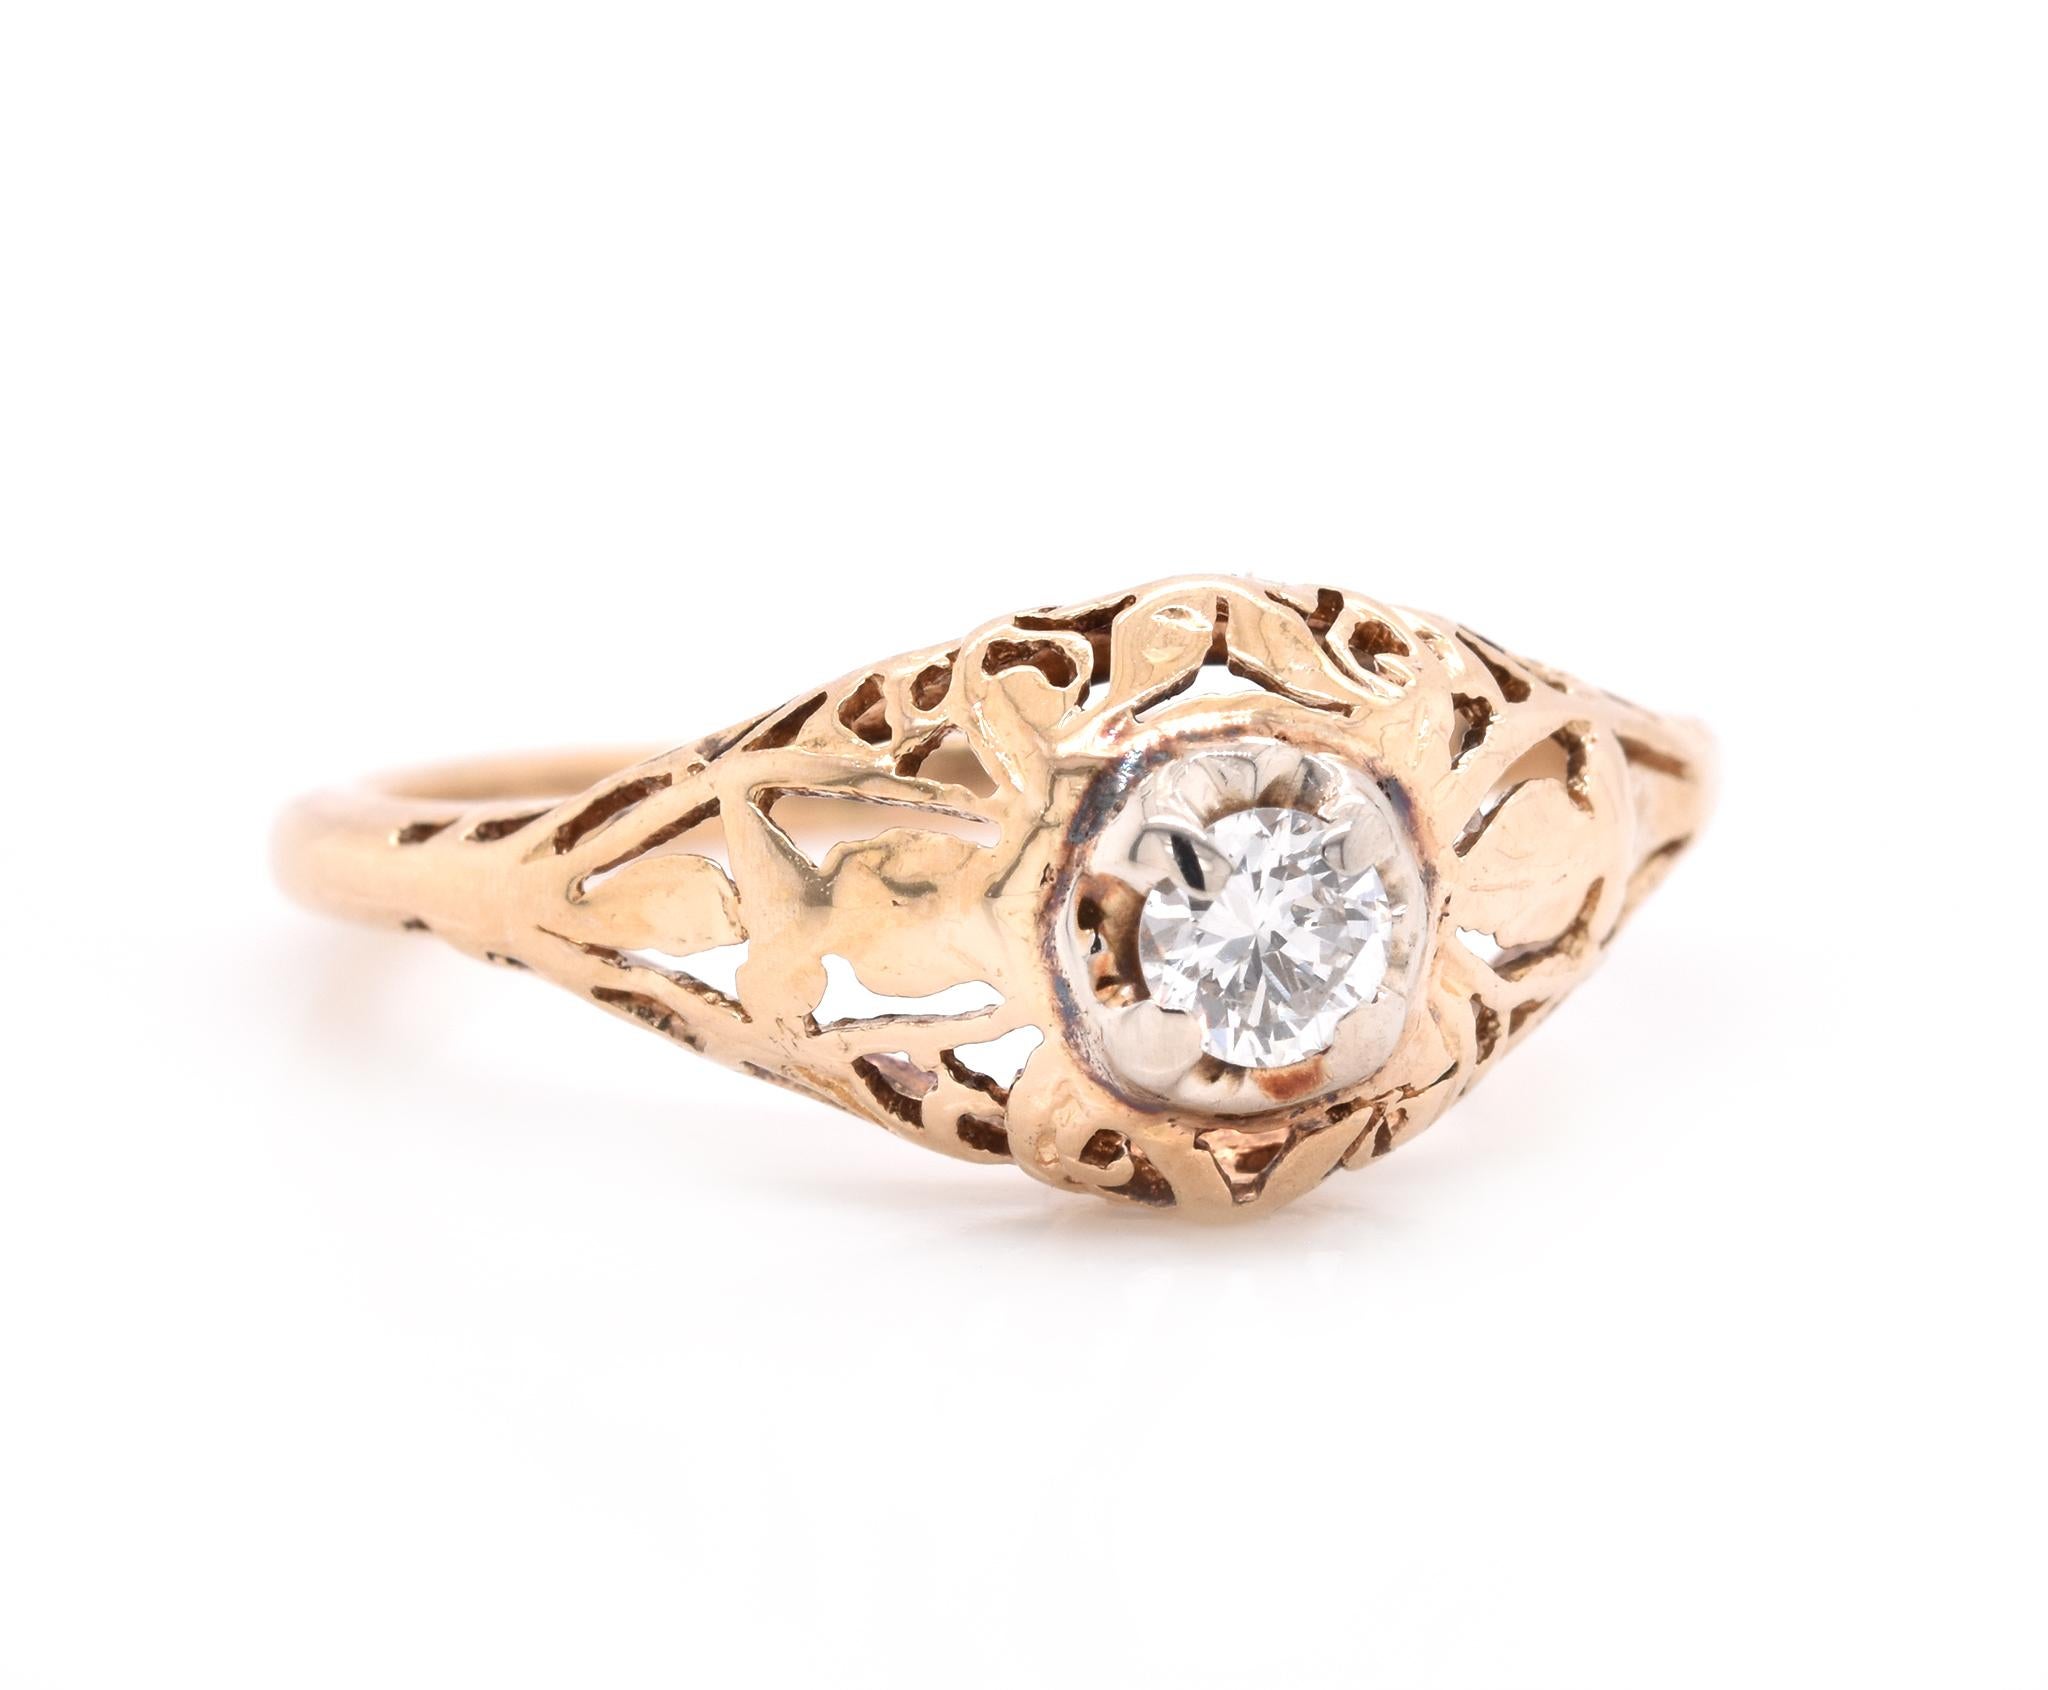 Material: 14K yellow gold
Center Diamond: 1 round brilliant cut = .15ct
Color: H
Clarity: VS2
Ring Size: 6.5 (please allow up to 2 additional business days for sizing requests)
Dimensions: ring shank measures 1.5mm
Weight: 2.07 grams